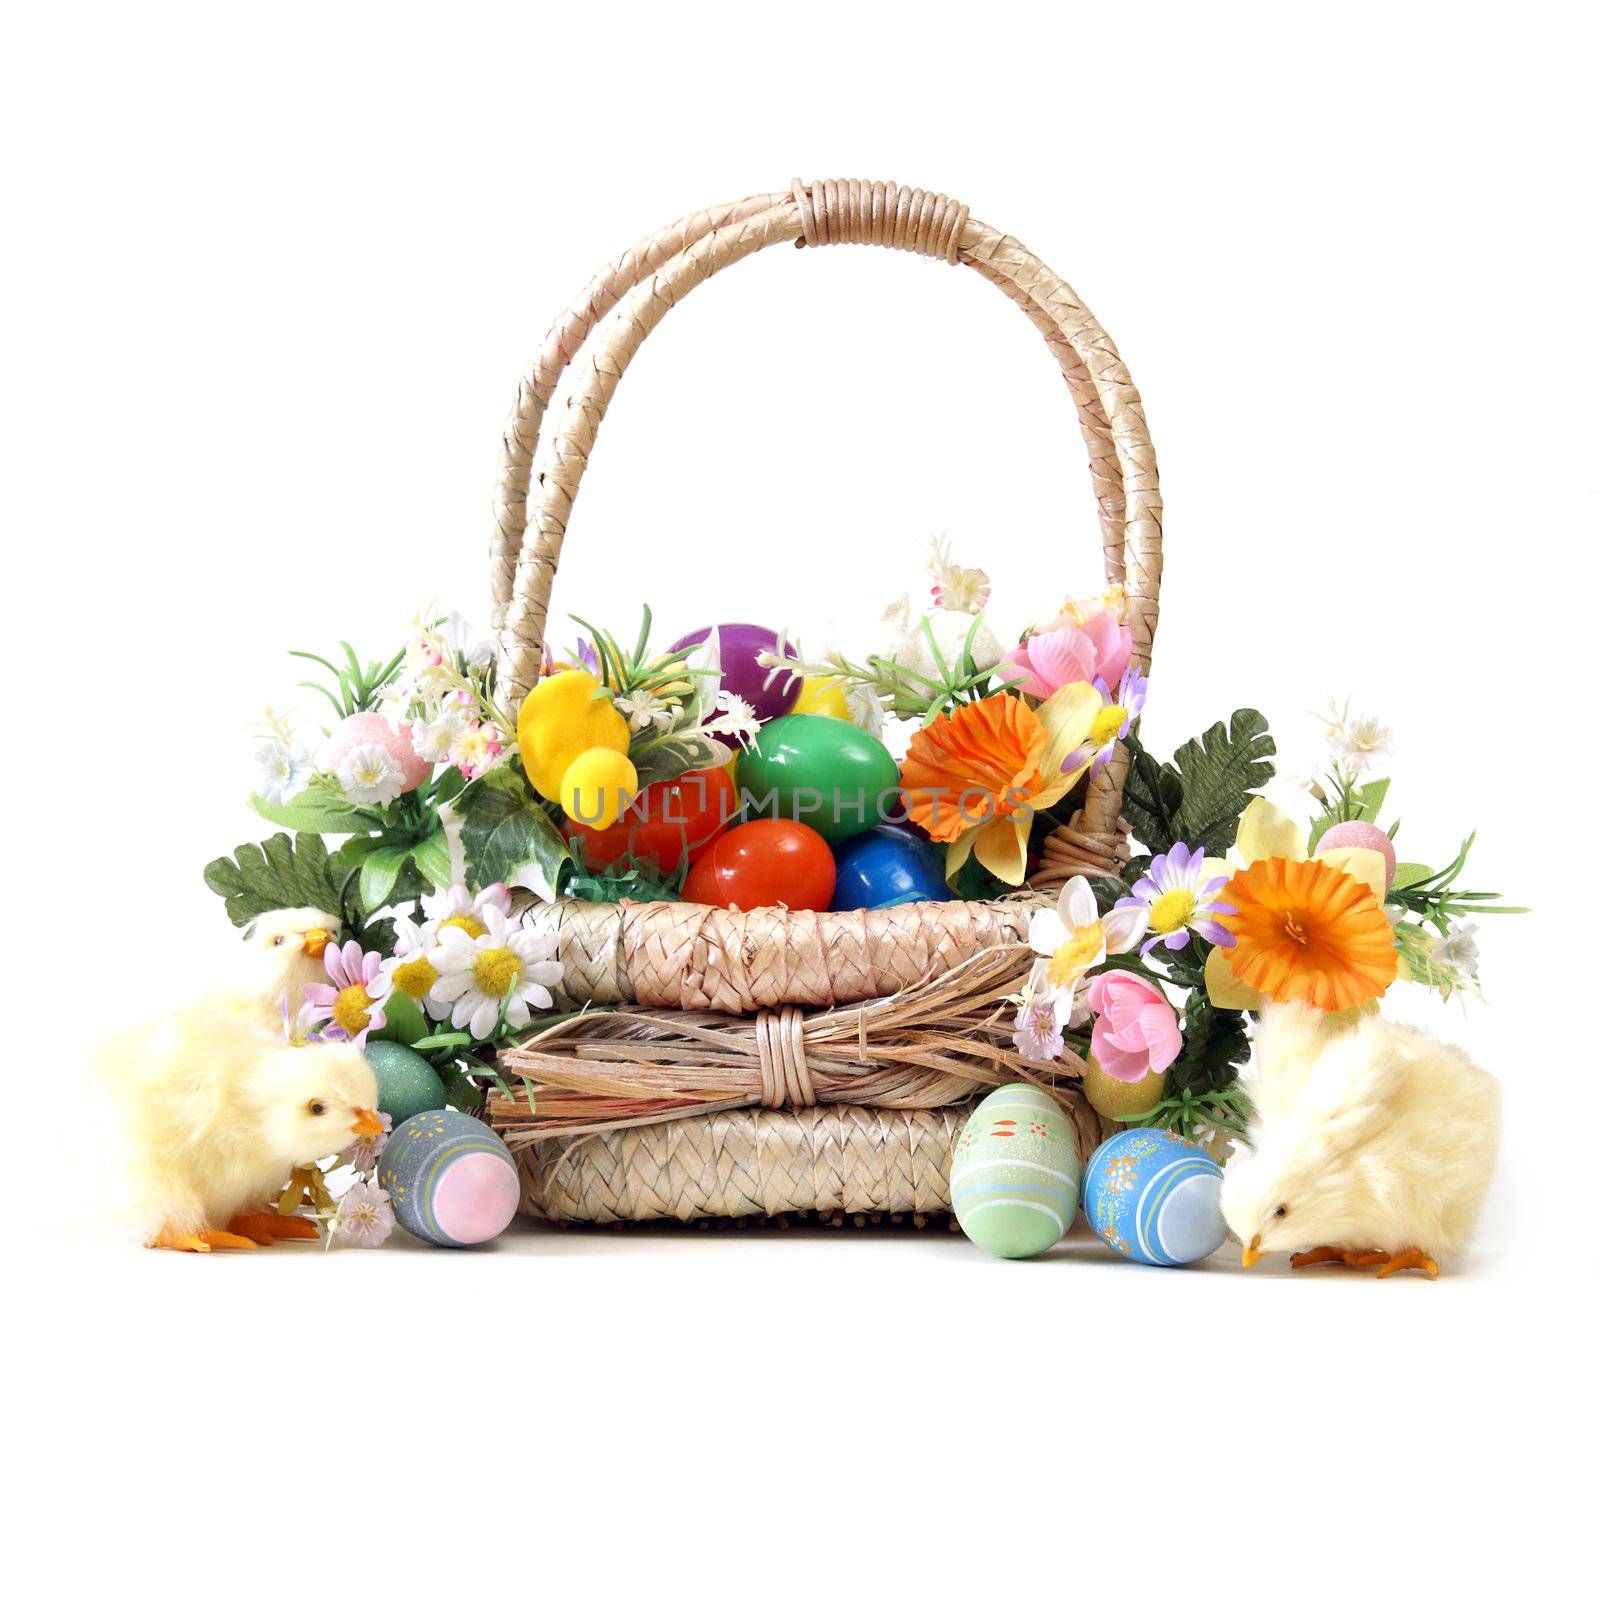 An easter basket full of eggs for the seasonal holiday.